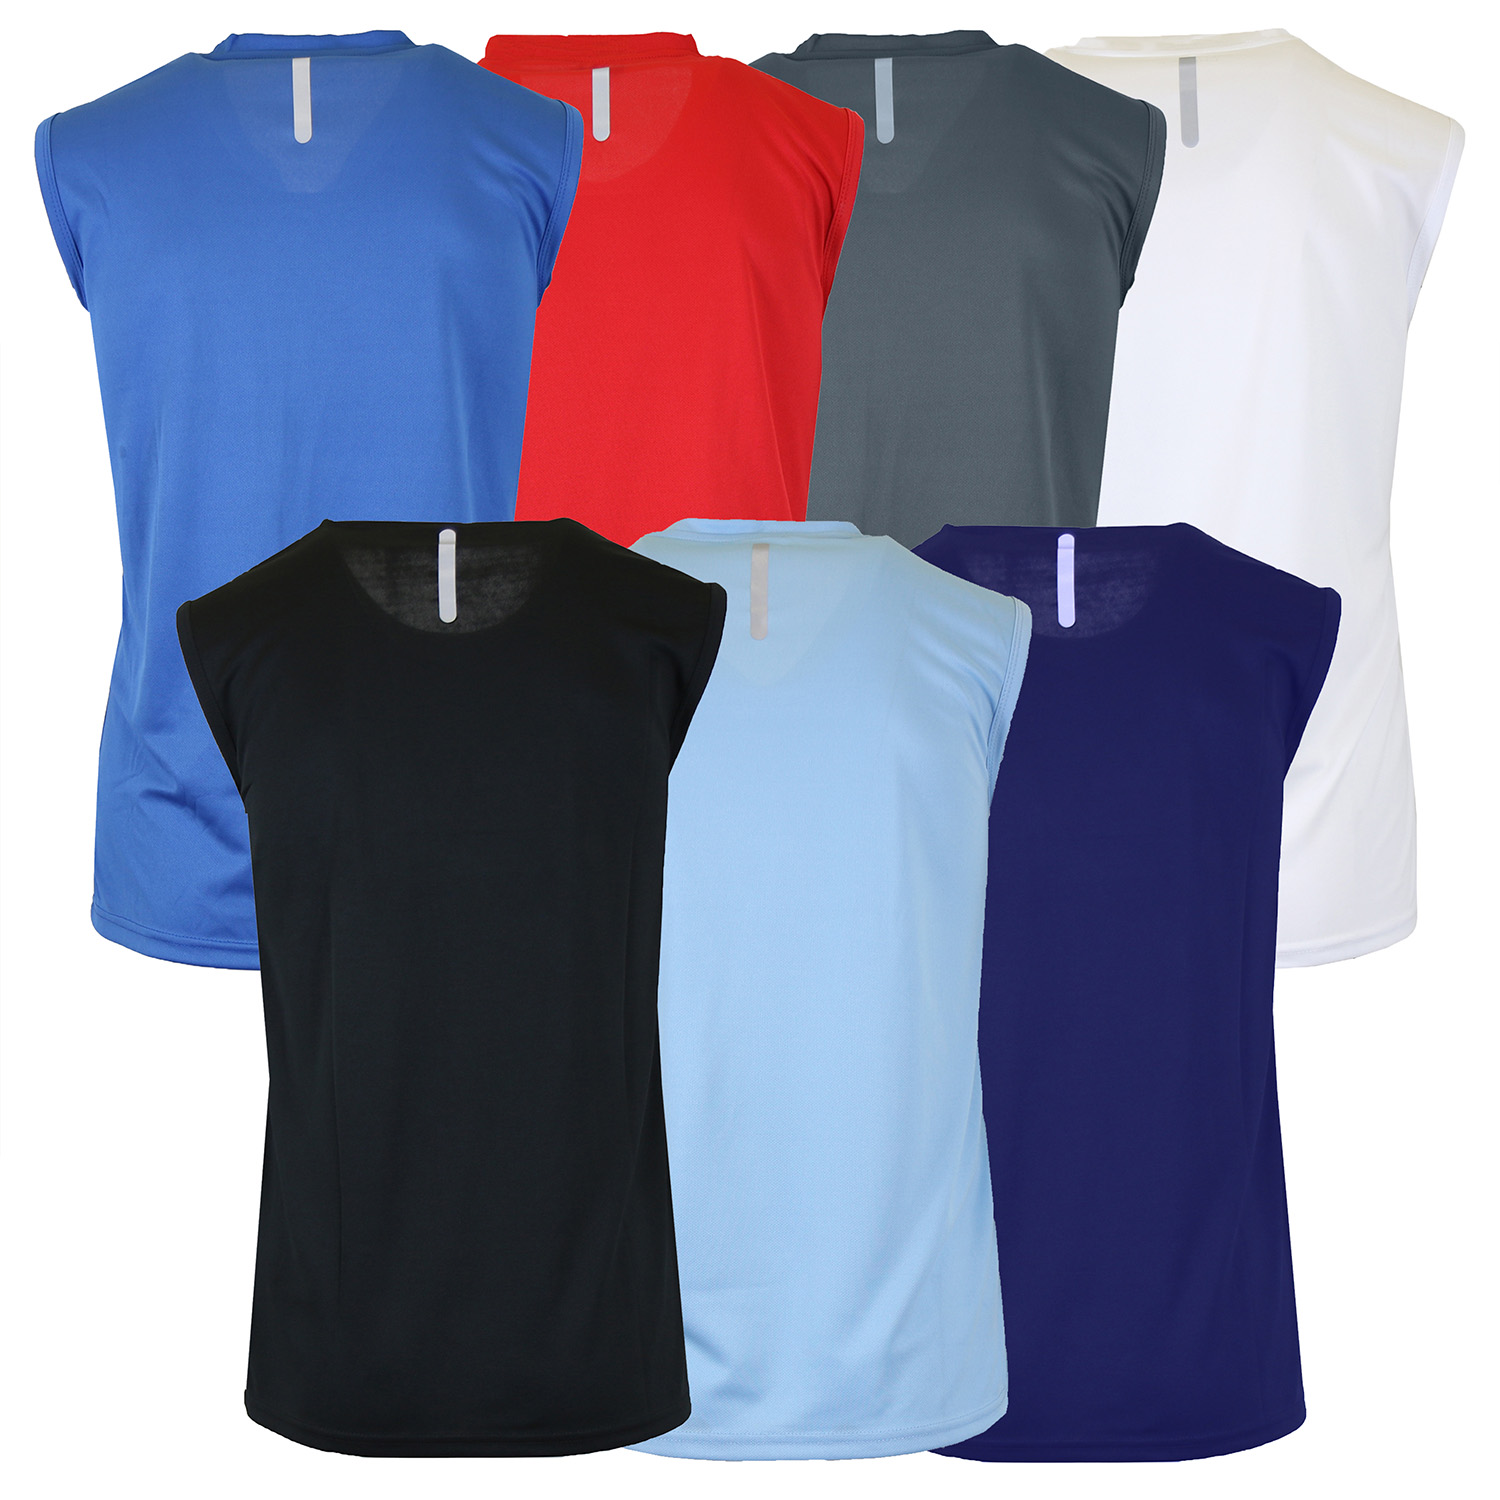 6-Pack Men's Moisture Wicking Wrinkle Free Performance Muscle Tee (Assorted Colors)